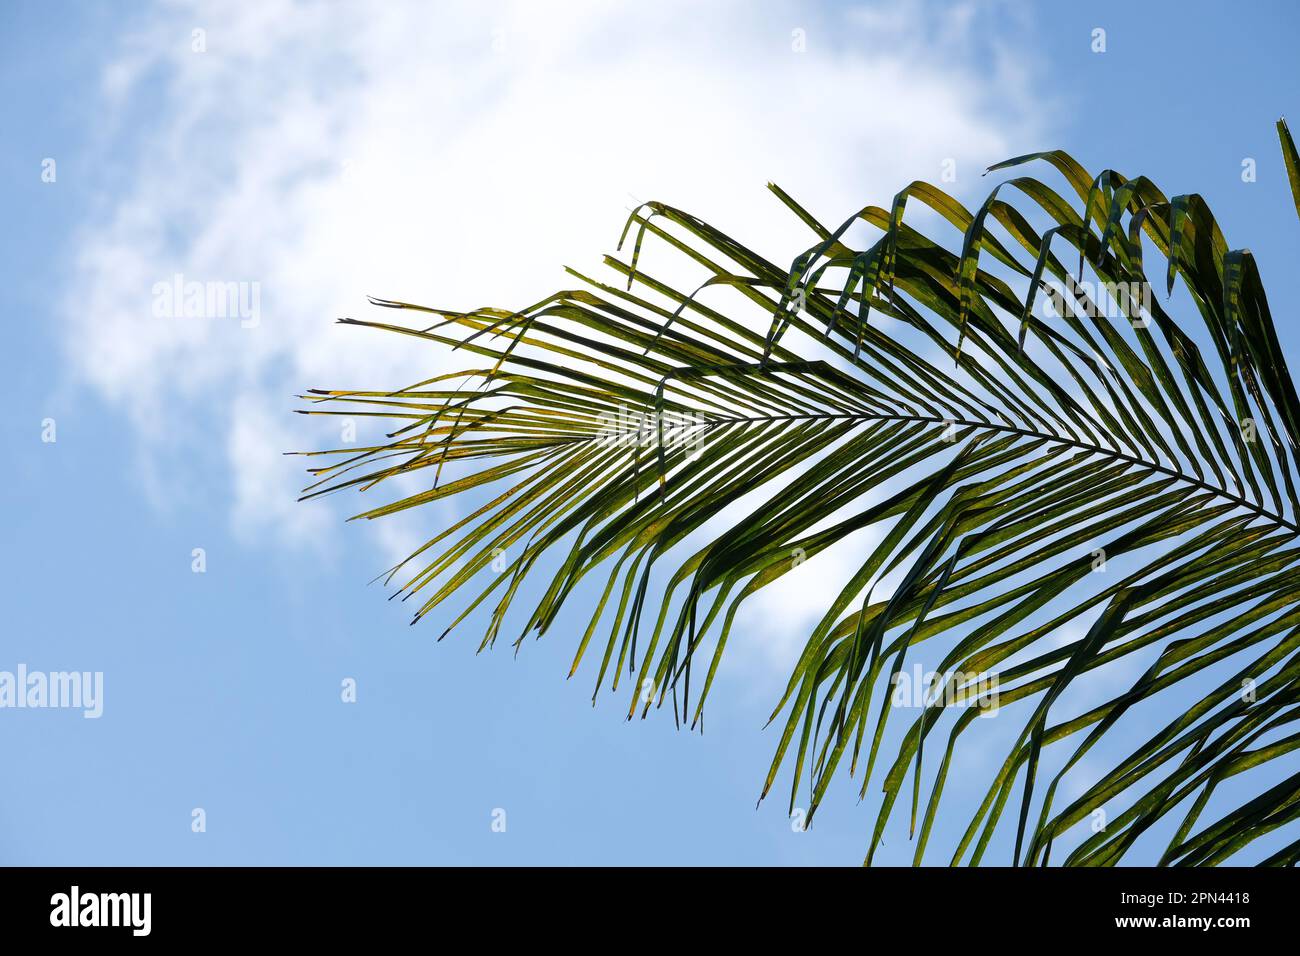 Low angle shot arecaceae palm tree plant leaves with cloudy sky background. Selective focus of tree leaves. Open space area. Stock Photo